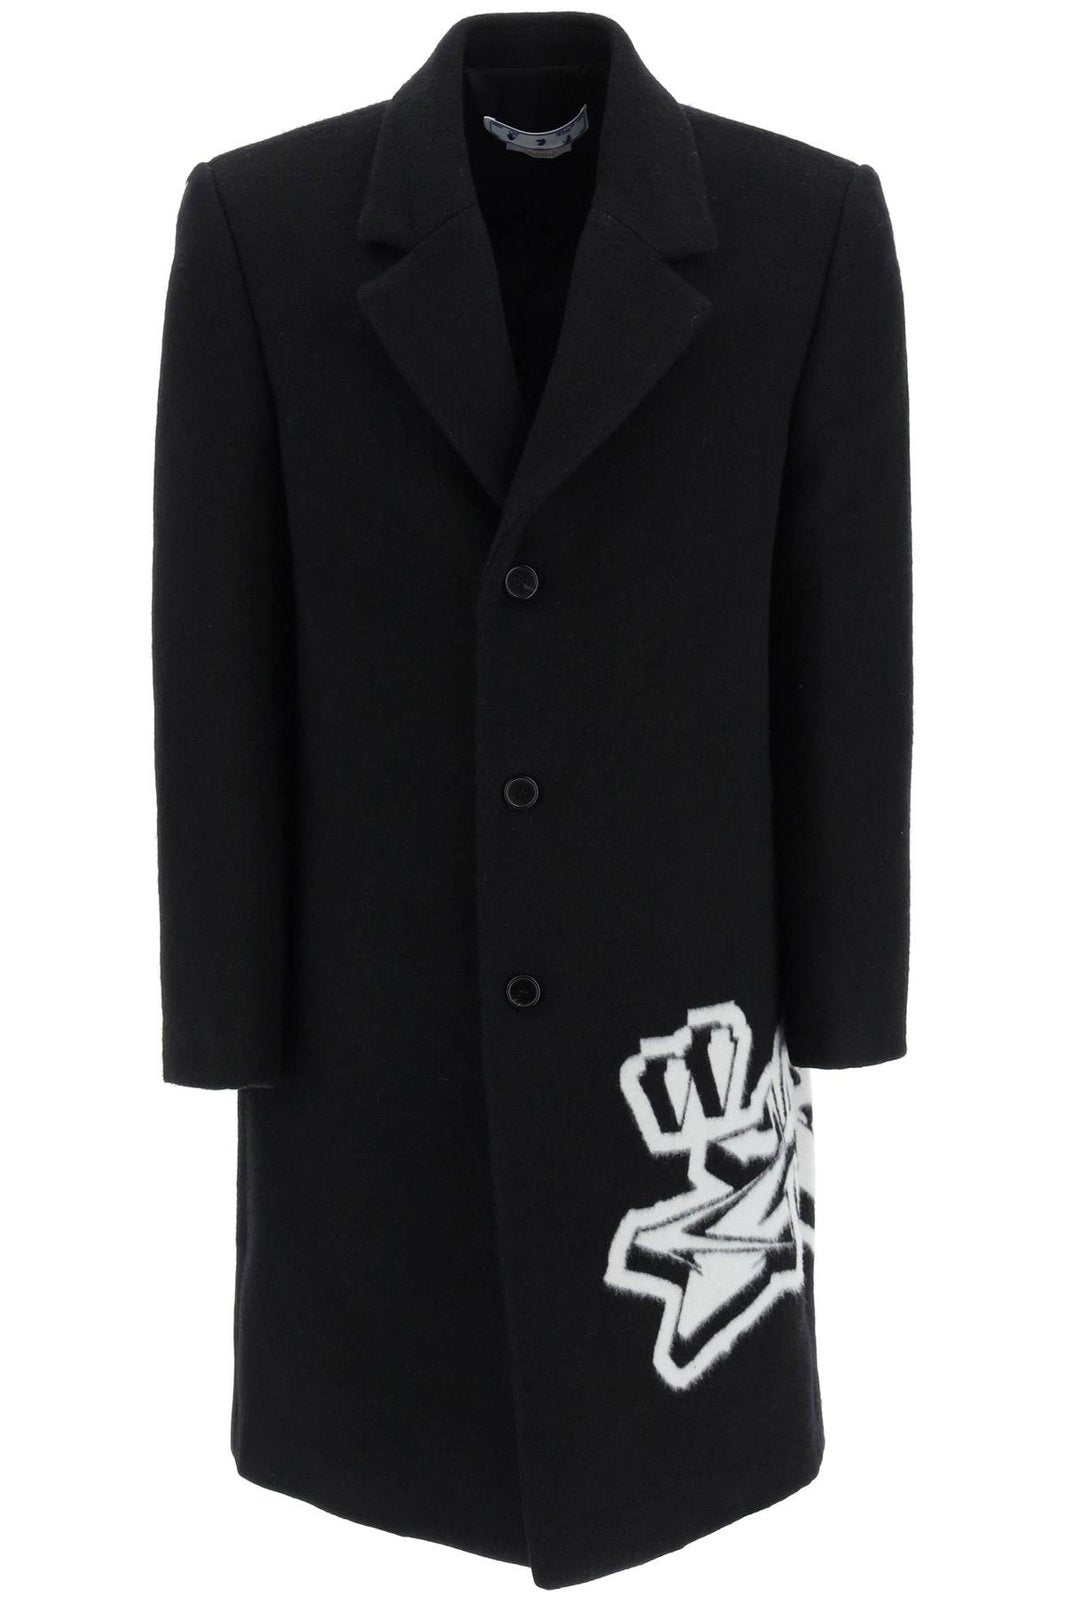 Off-White Graphic Printed Single-Breasted Coat